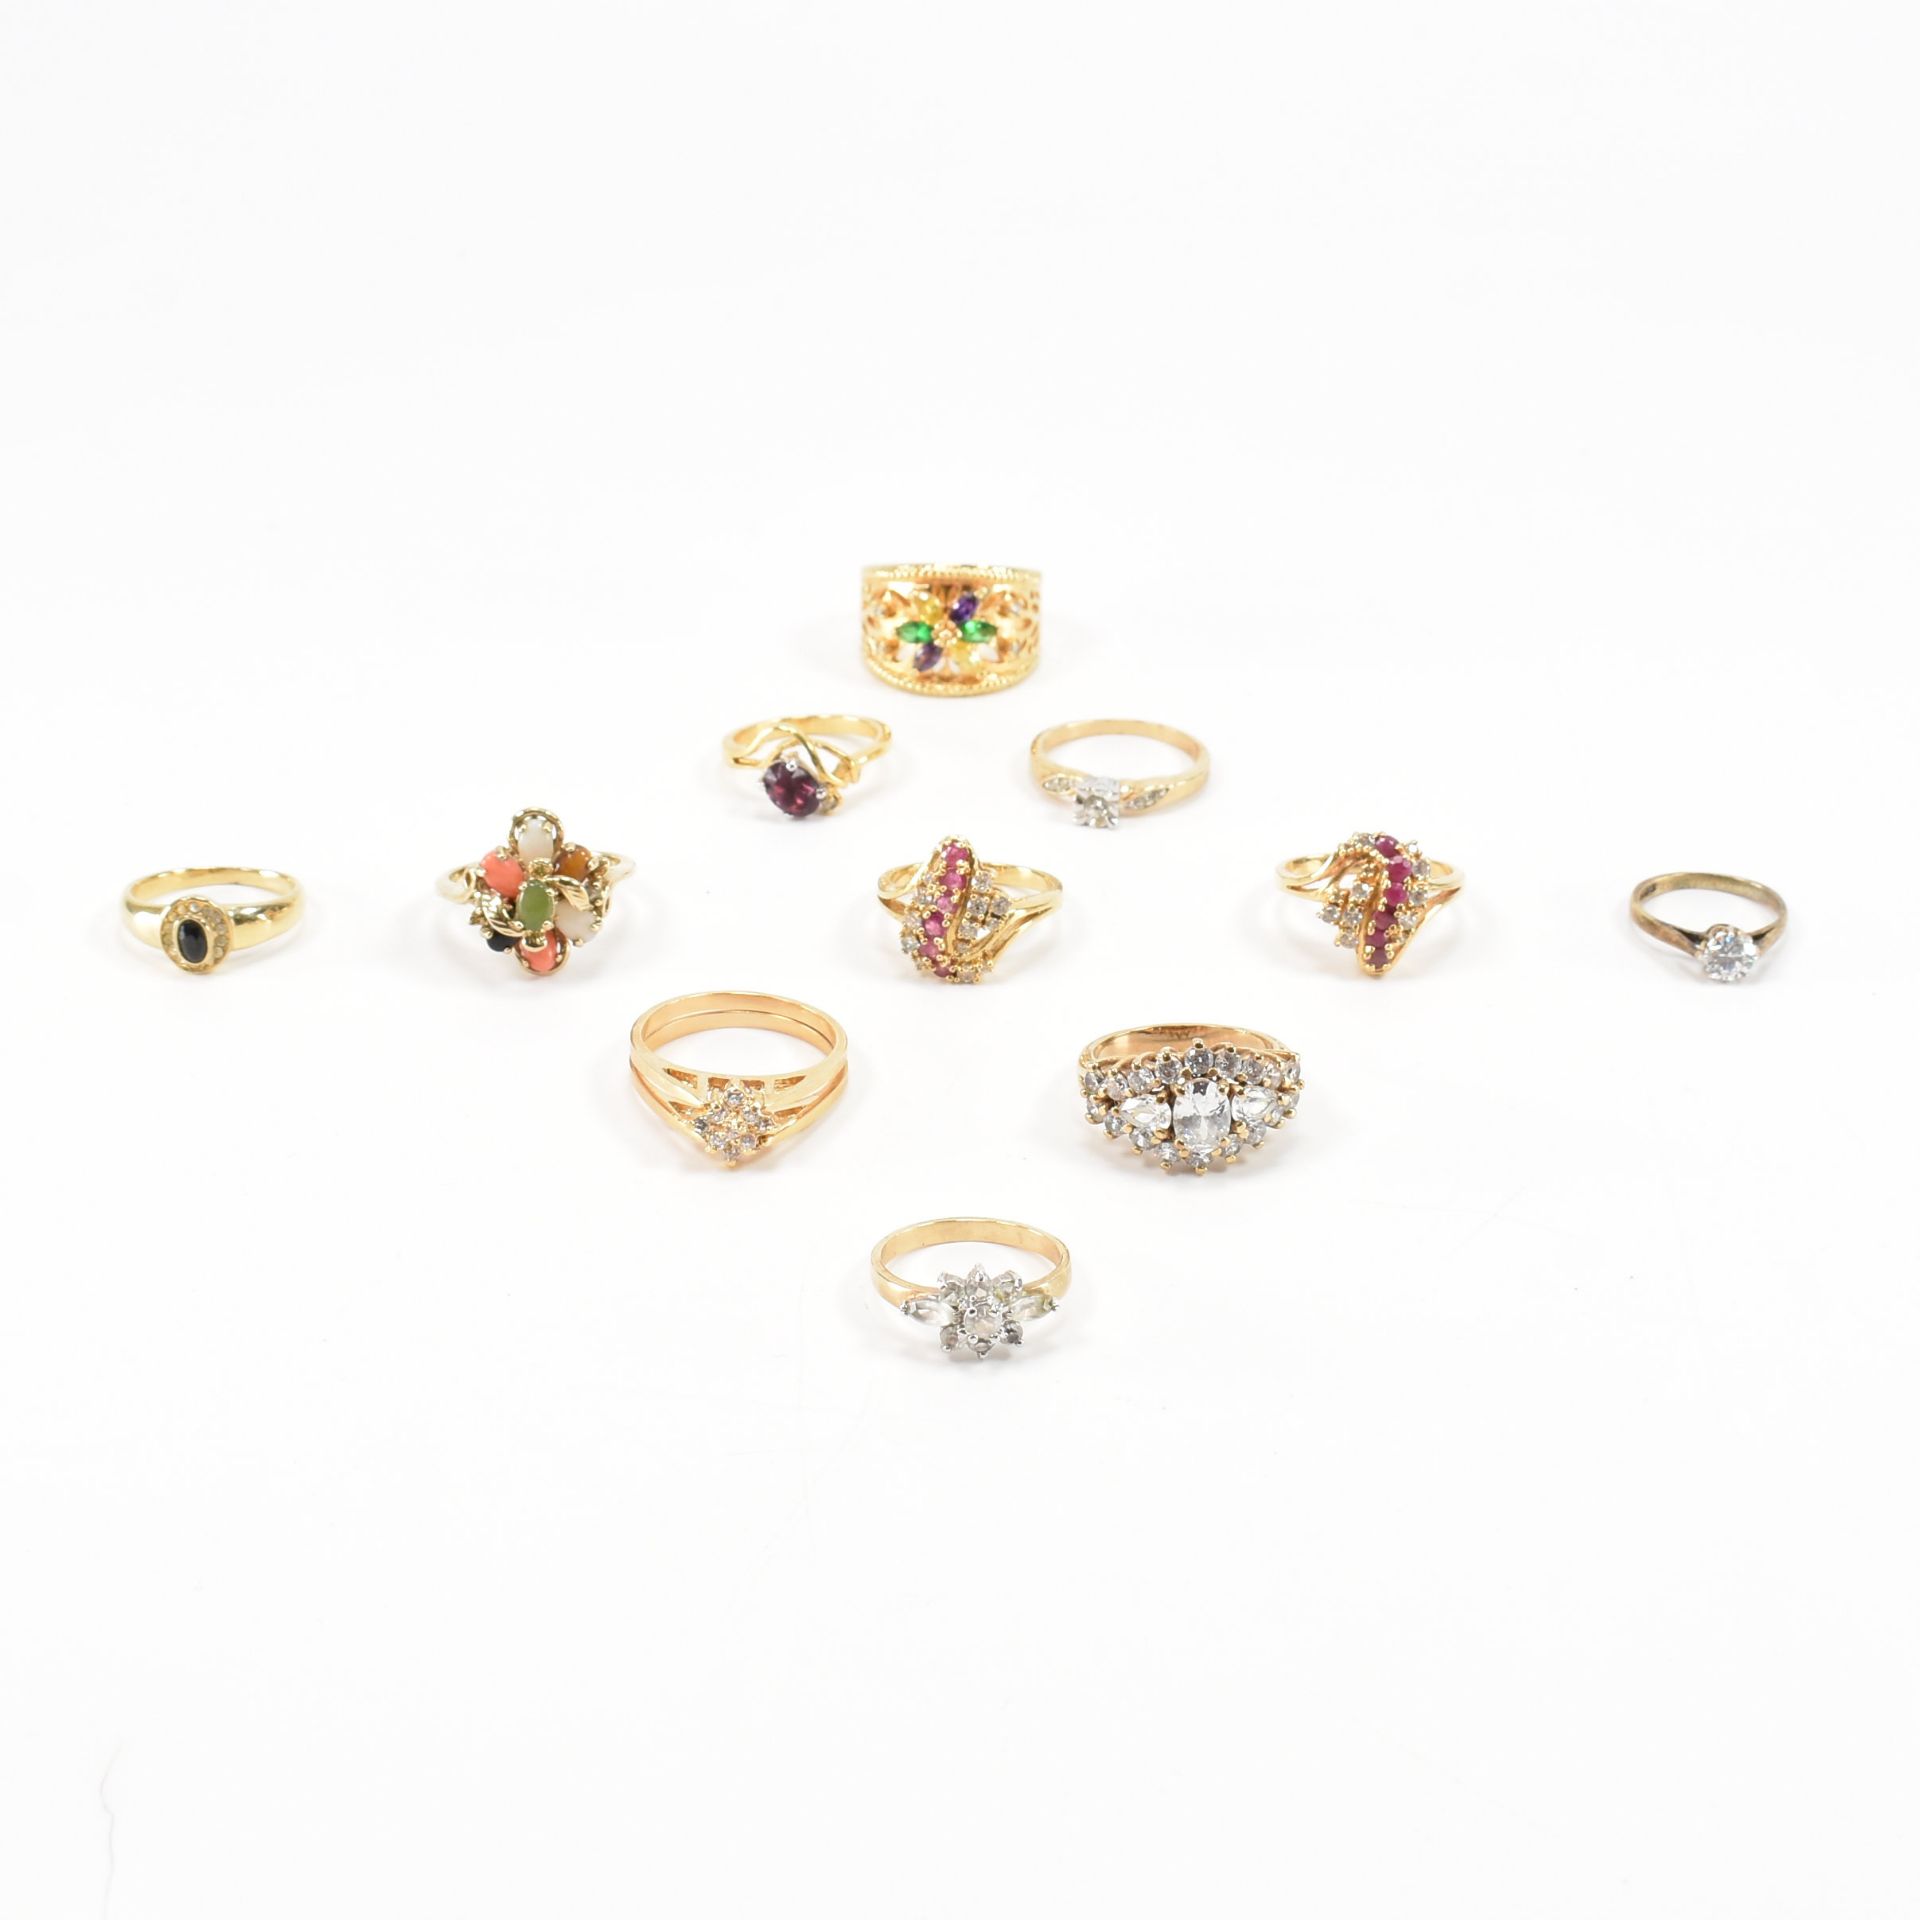 COLLECTION OF COSTUME JEWELLERY RINGS